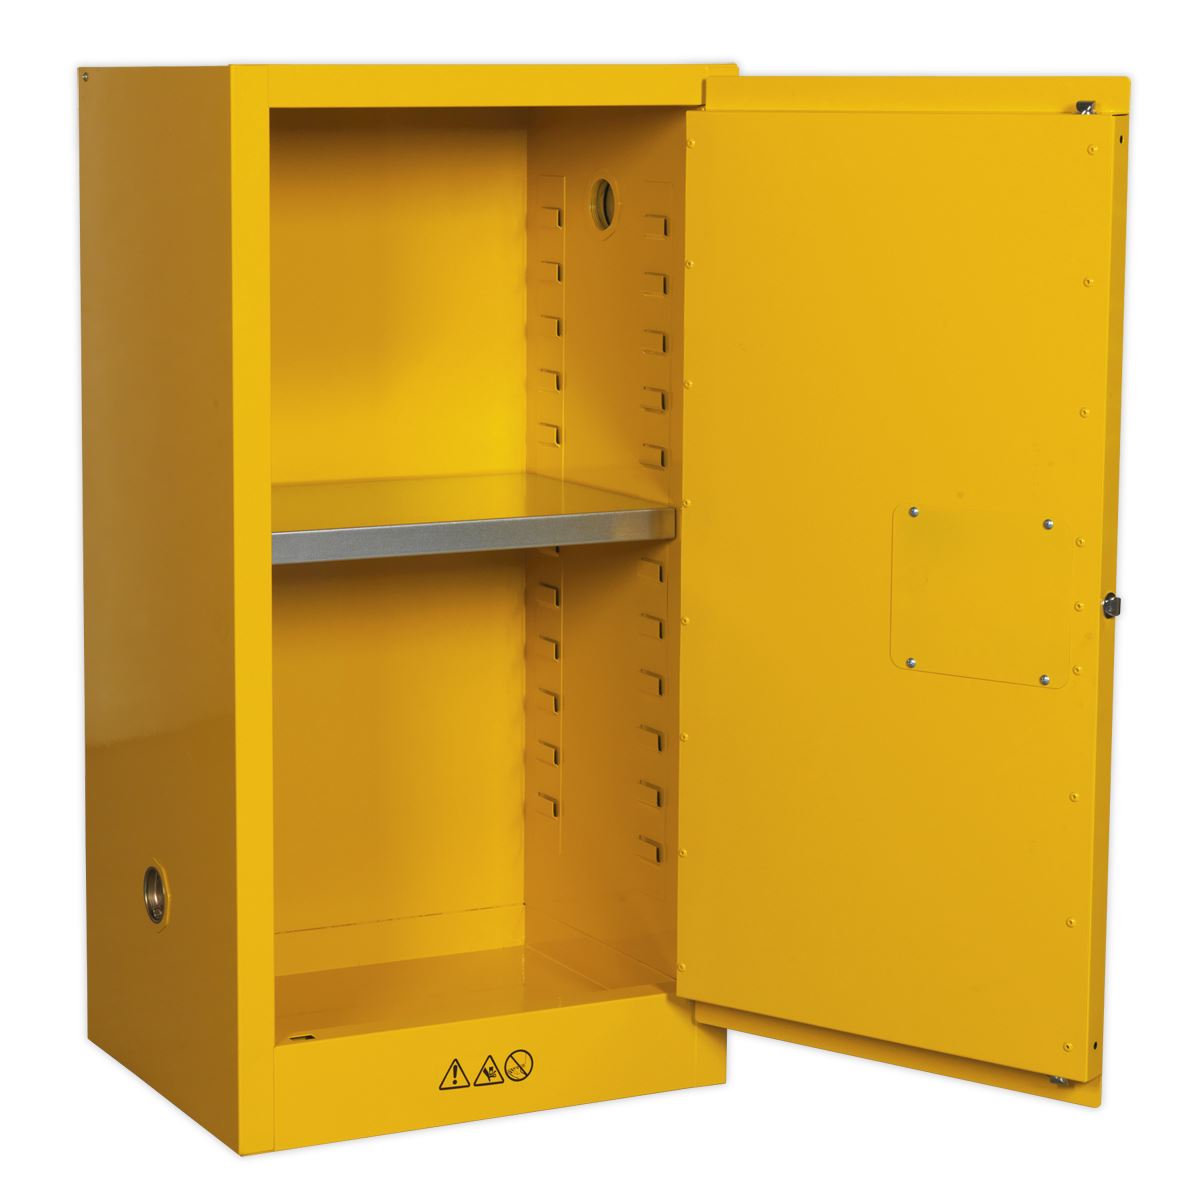 Sealey Flammables Storage Cabinet 585 x 460 x 1120mm